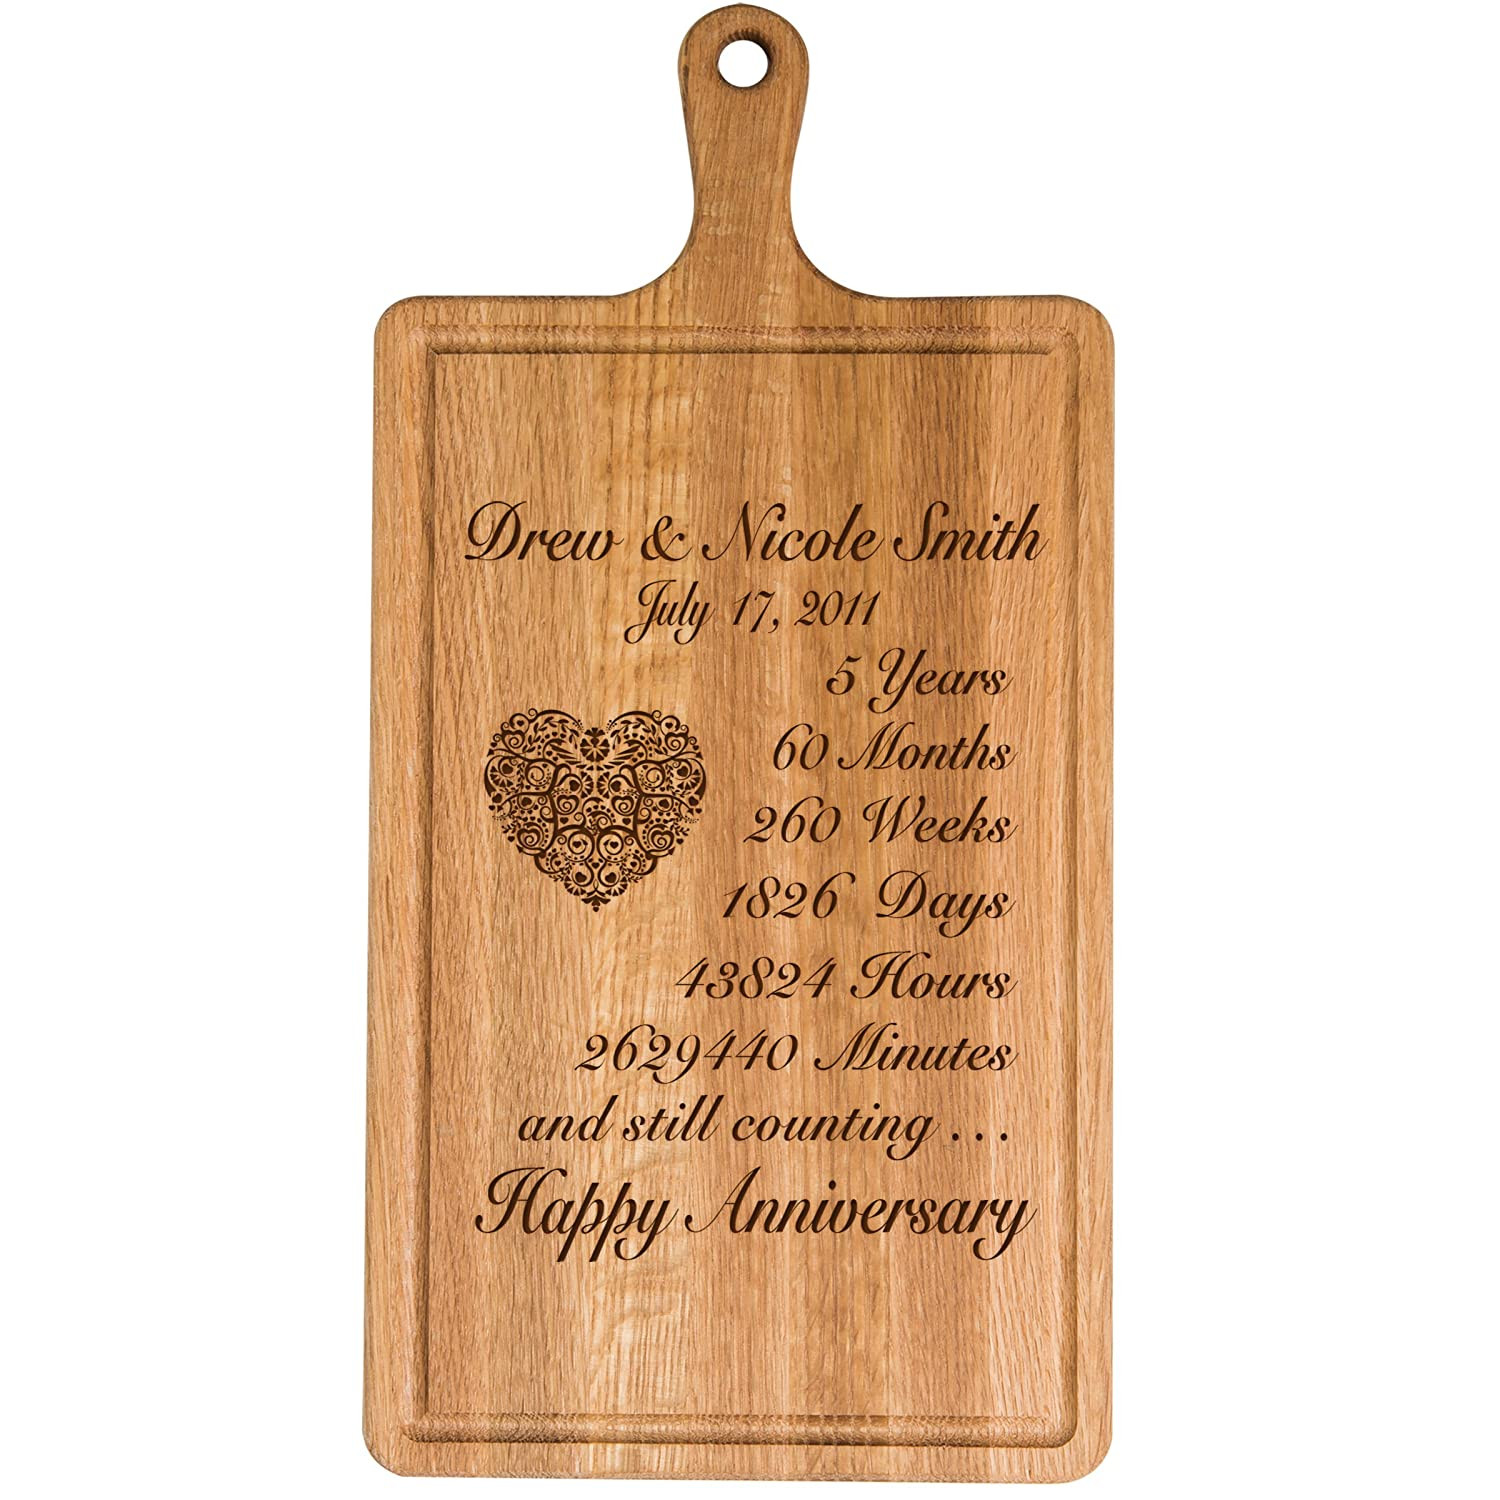 5Th Year Anniversary Gift Ideas
 5th Anniversary Gifts for Her Under $60